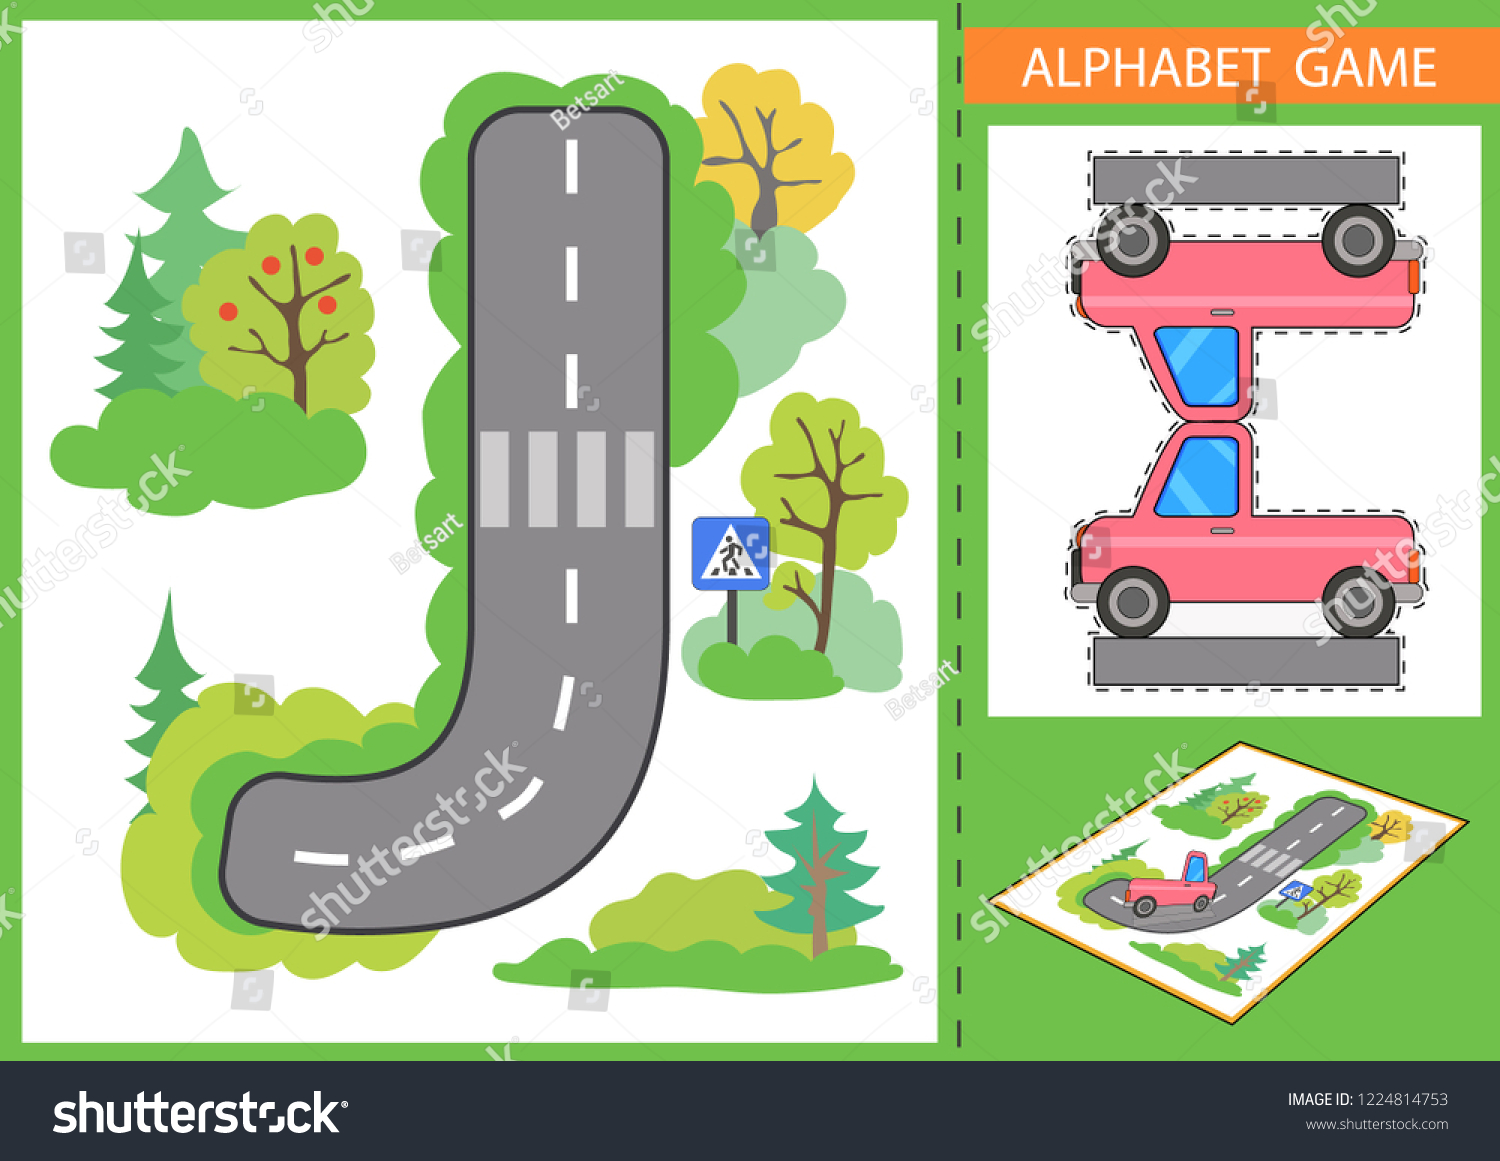 Learn Alphabet And Spelling 1577759 Hd Wallpaper